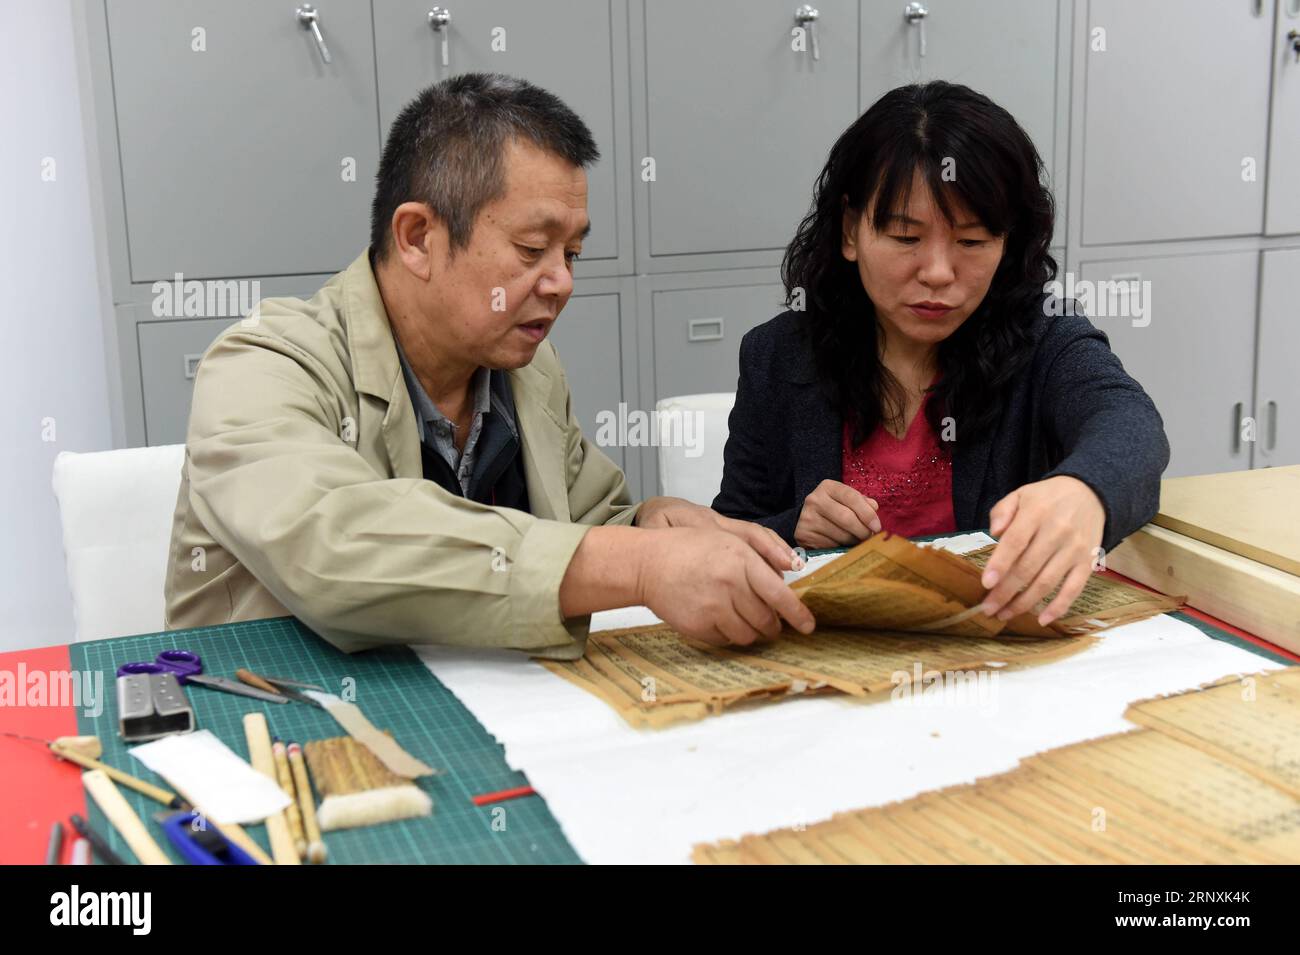 (180202) -- SHIJIAZHUANG, Feb. 2, 2018 -- Su Wenzhu (R) repairs ancient books with her colleague at the Hebei Library in Shijiazhuang, capital of north China s Hebei Province, Nov. 21, 2017. Su Wenzhu, a delegate to the 19th National Congress of the Communist Party of China (CPC), is director of the special collection department in Hebei Library. She is dedicated to protecting ancient books and digging out traditional Chinese cultural heritages within them, in an aim to strengthen Chinese people s cultural confidence and publicize the traditional Chinese culture. ) (zwx) CHINA-HEBEI-SU WENZHU- Stock Photo